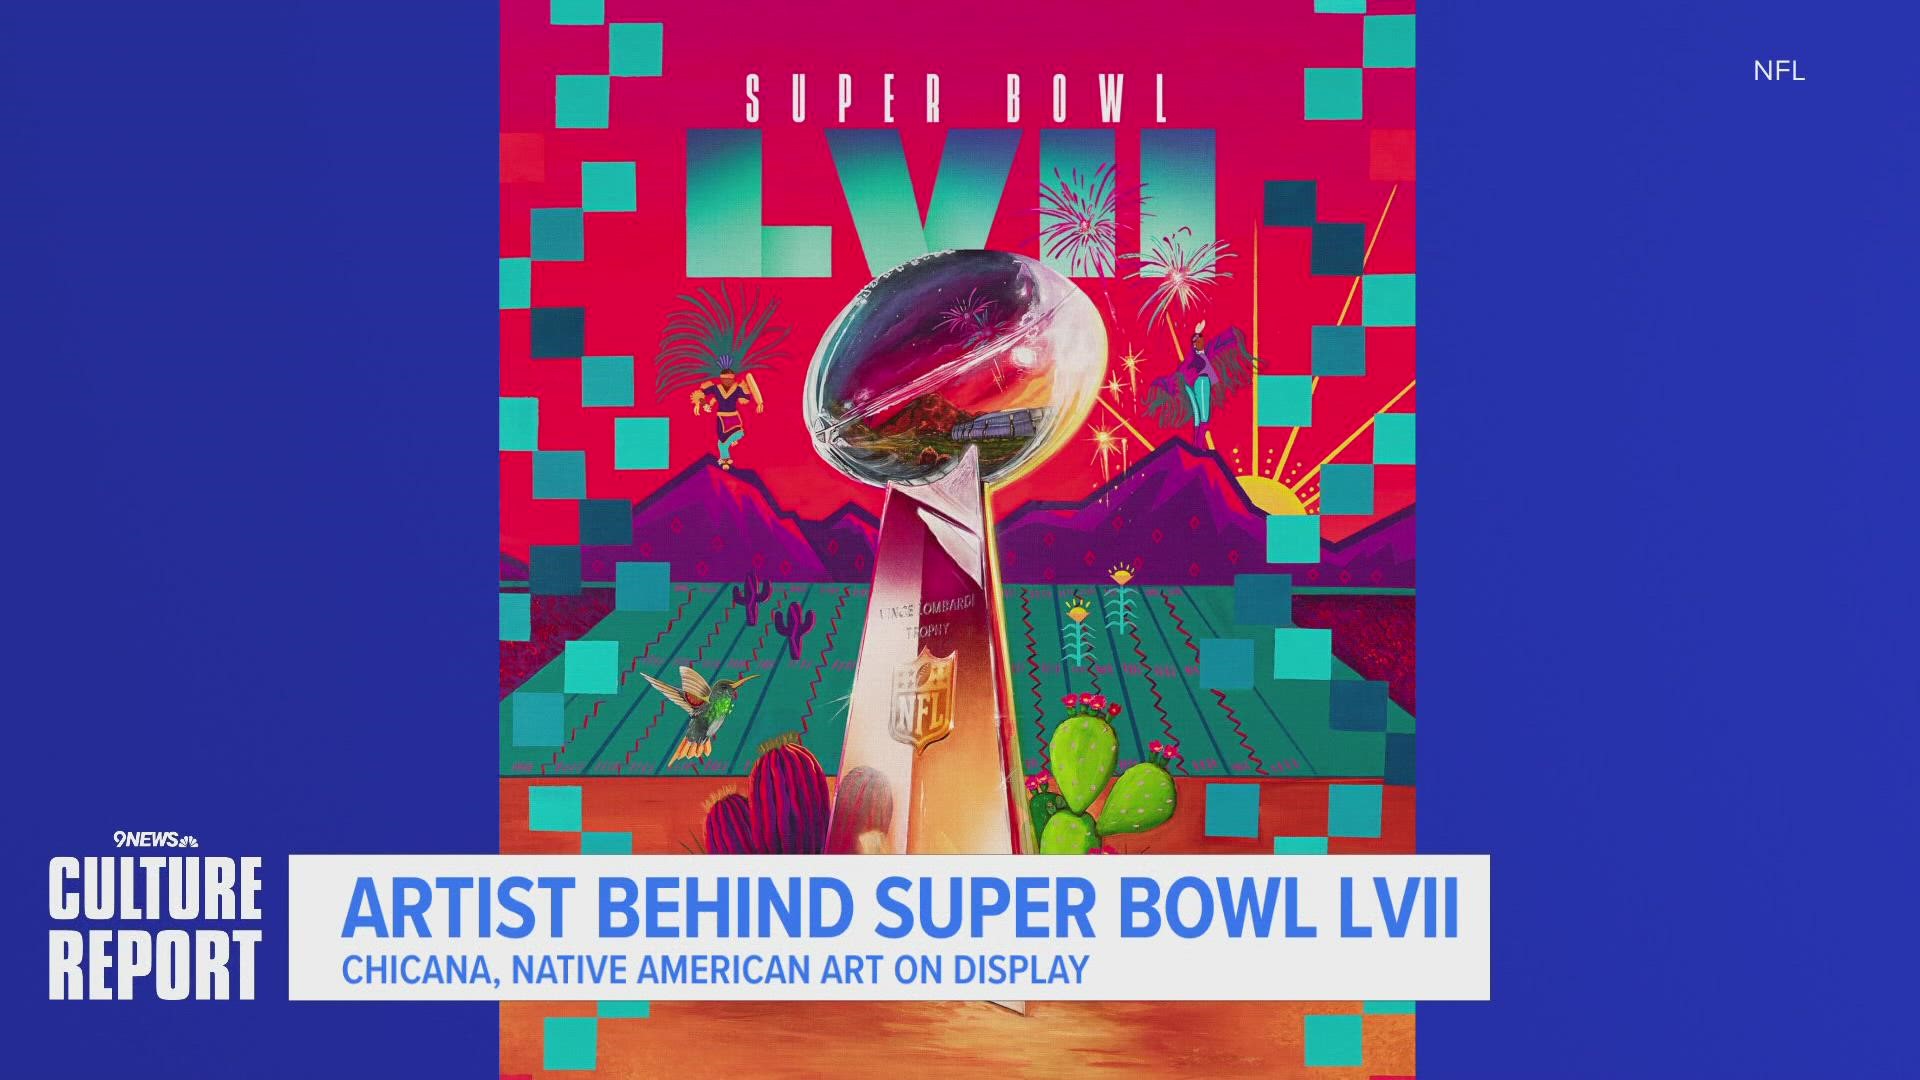 NFL is making strides in their diversity initiatives by partnering with Native-American artist Lucinda "La Morena" Hinojos for Super Bowl artwork.